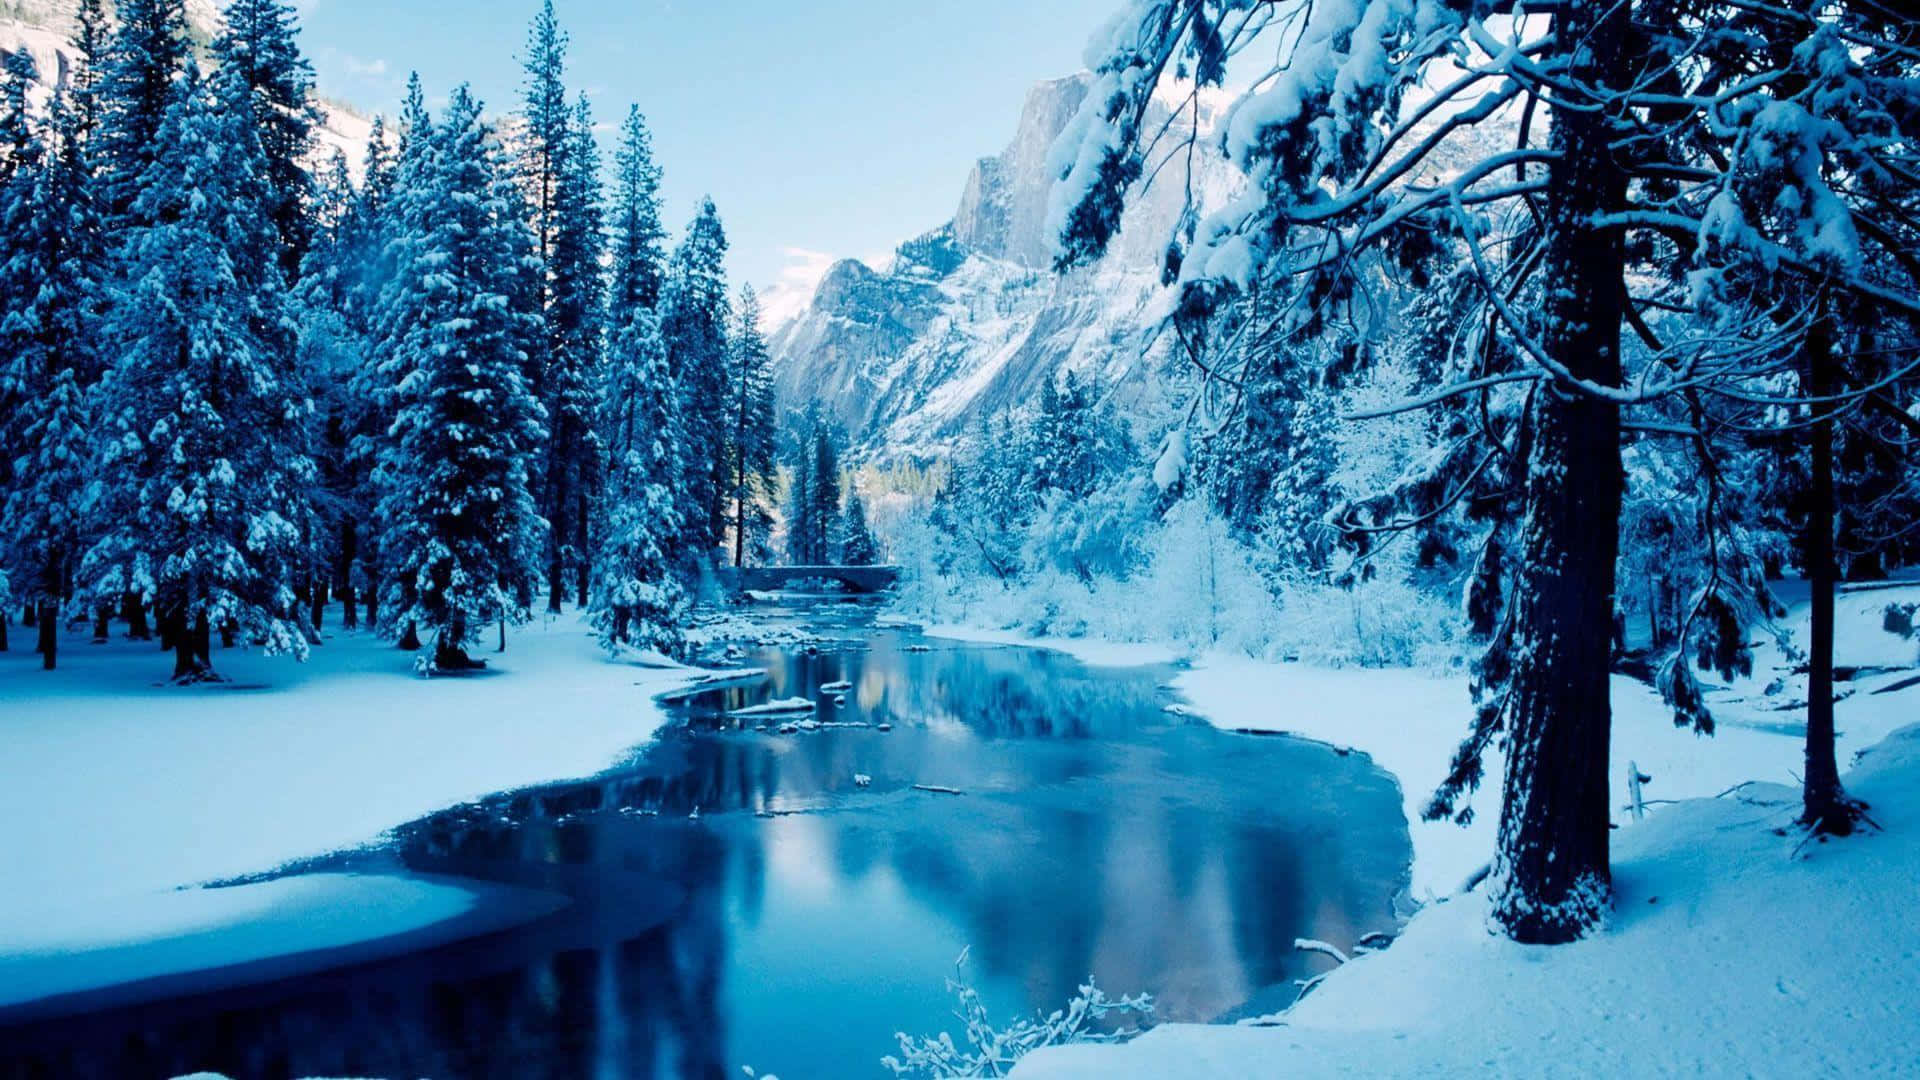 Enjoy the magical beauty of winter